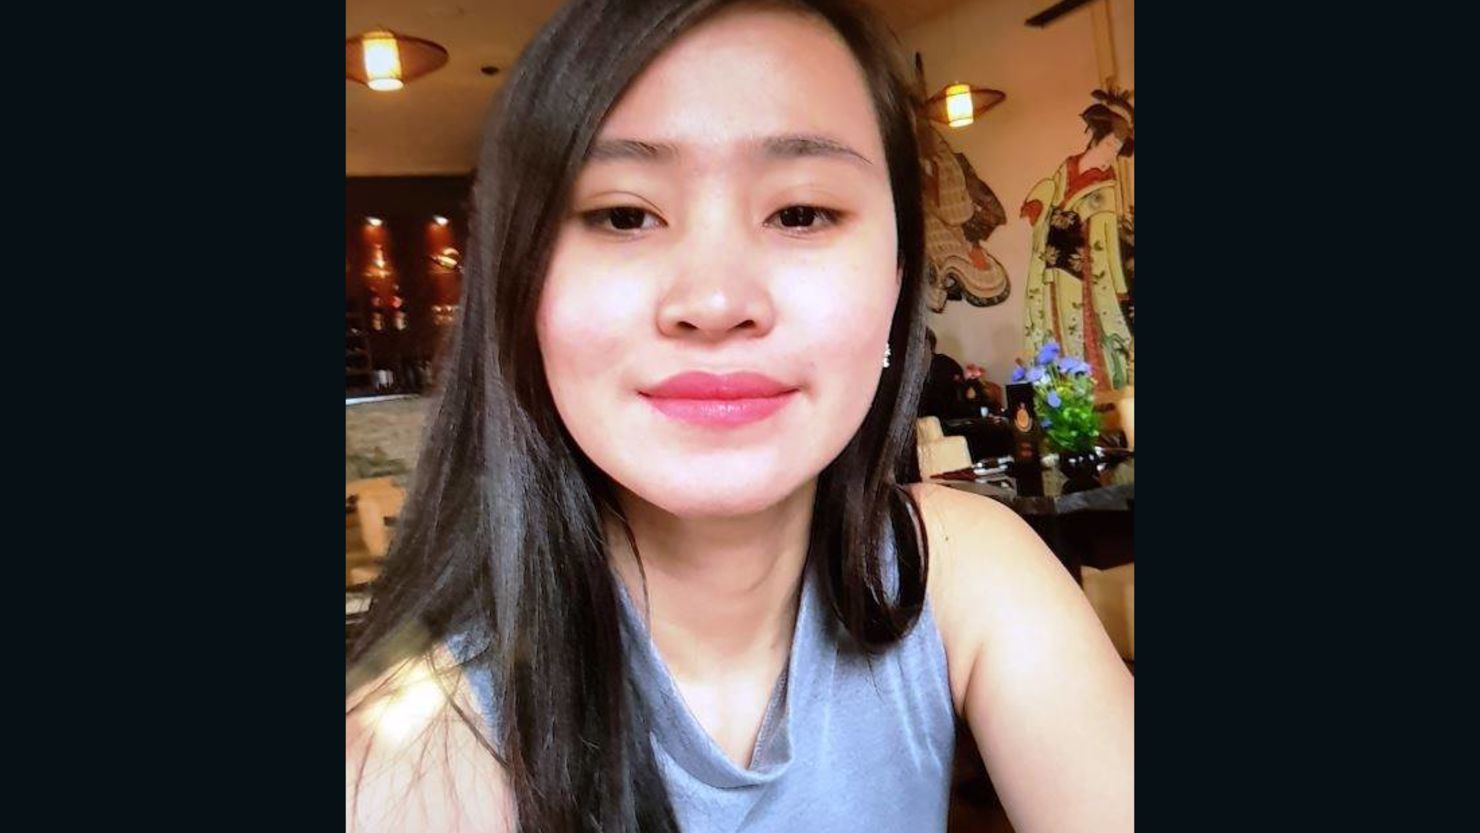 Jastine Valdez, who moved to Ireland to study, disappeared on Saturday afternoon. 